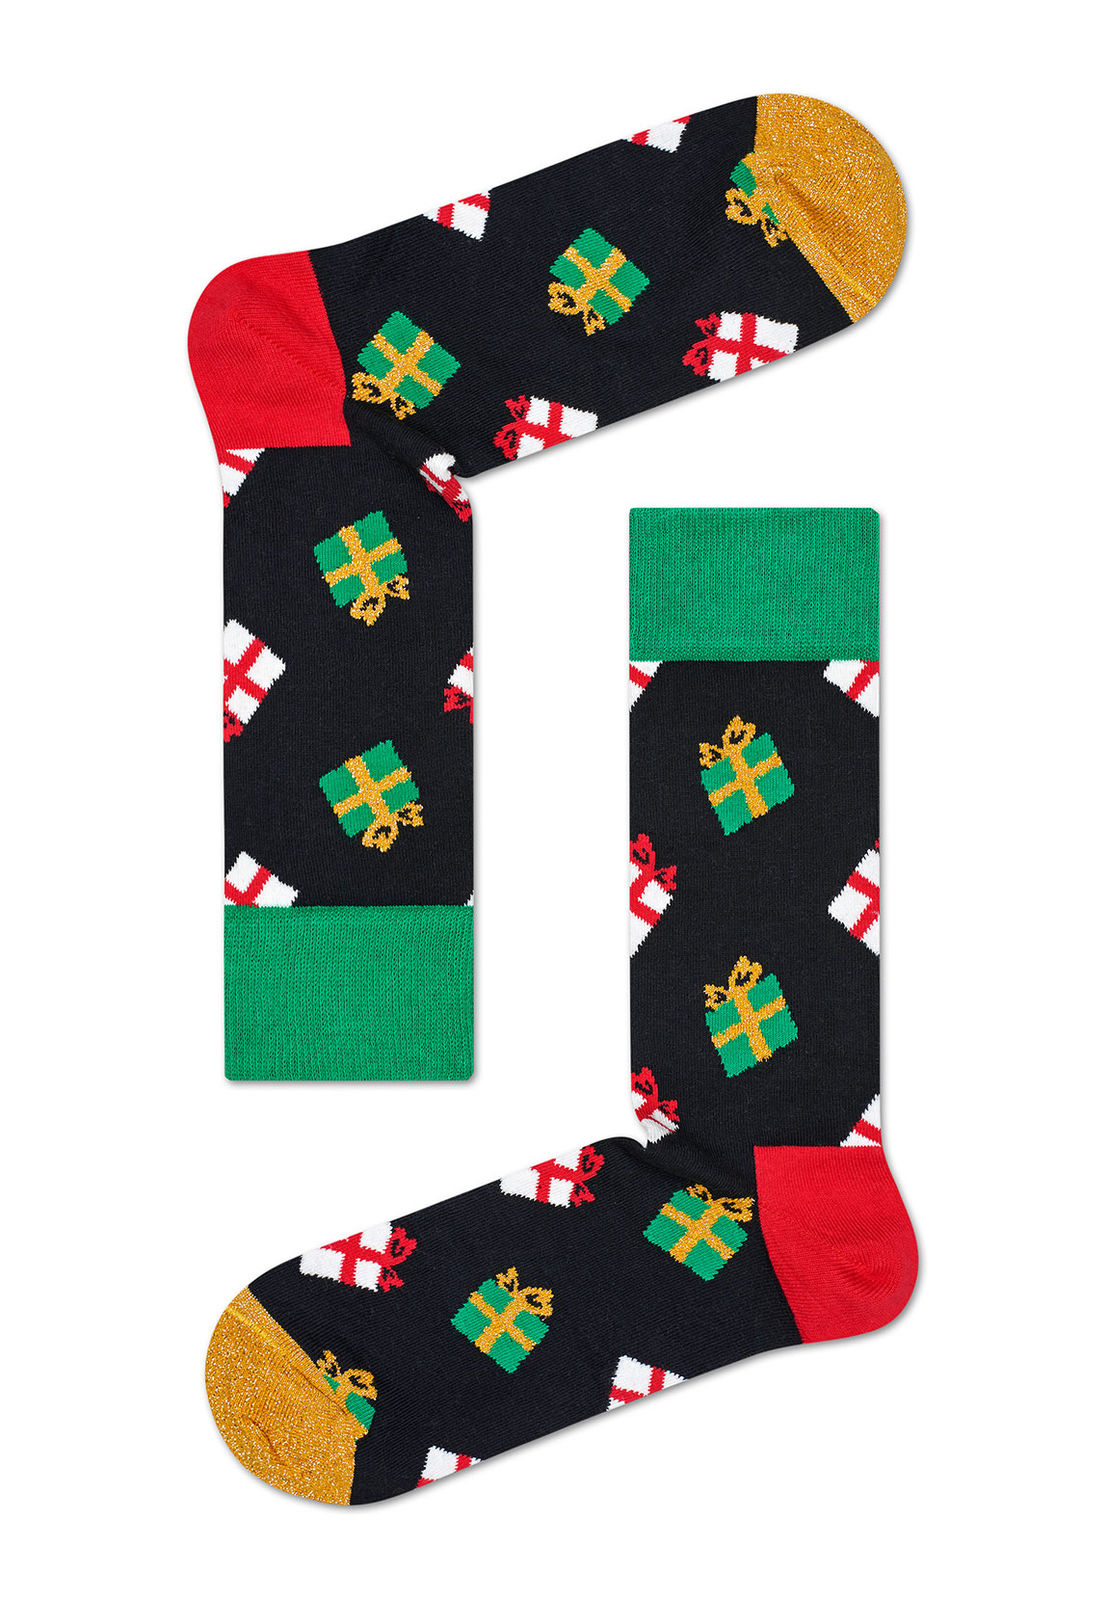 Happy Socks XMAS08-7001 Xmas Box Set - Christmas gift box with three pairs of socks, one pair is black with presents pattern in green, red, white and gold, gold toe, green cuff and red heel. Another is rust orange with speckled confetti style pattern in black, green and gold with black cuff, heel and toe and the other style is rust with a black wavy diagonal pattern and cuff and red toe.